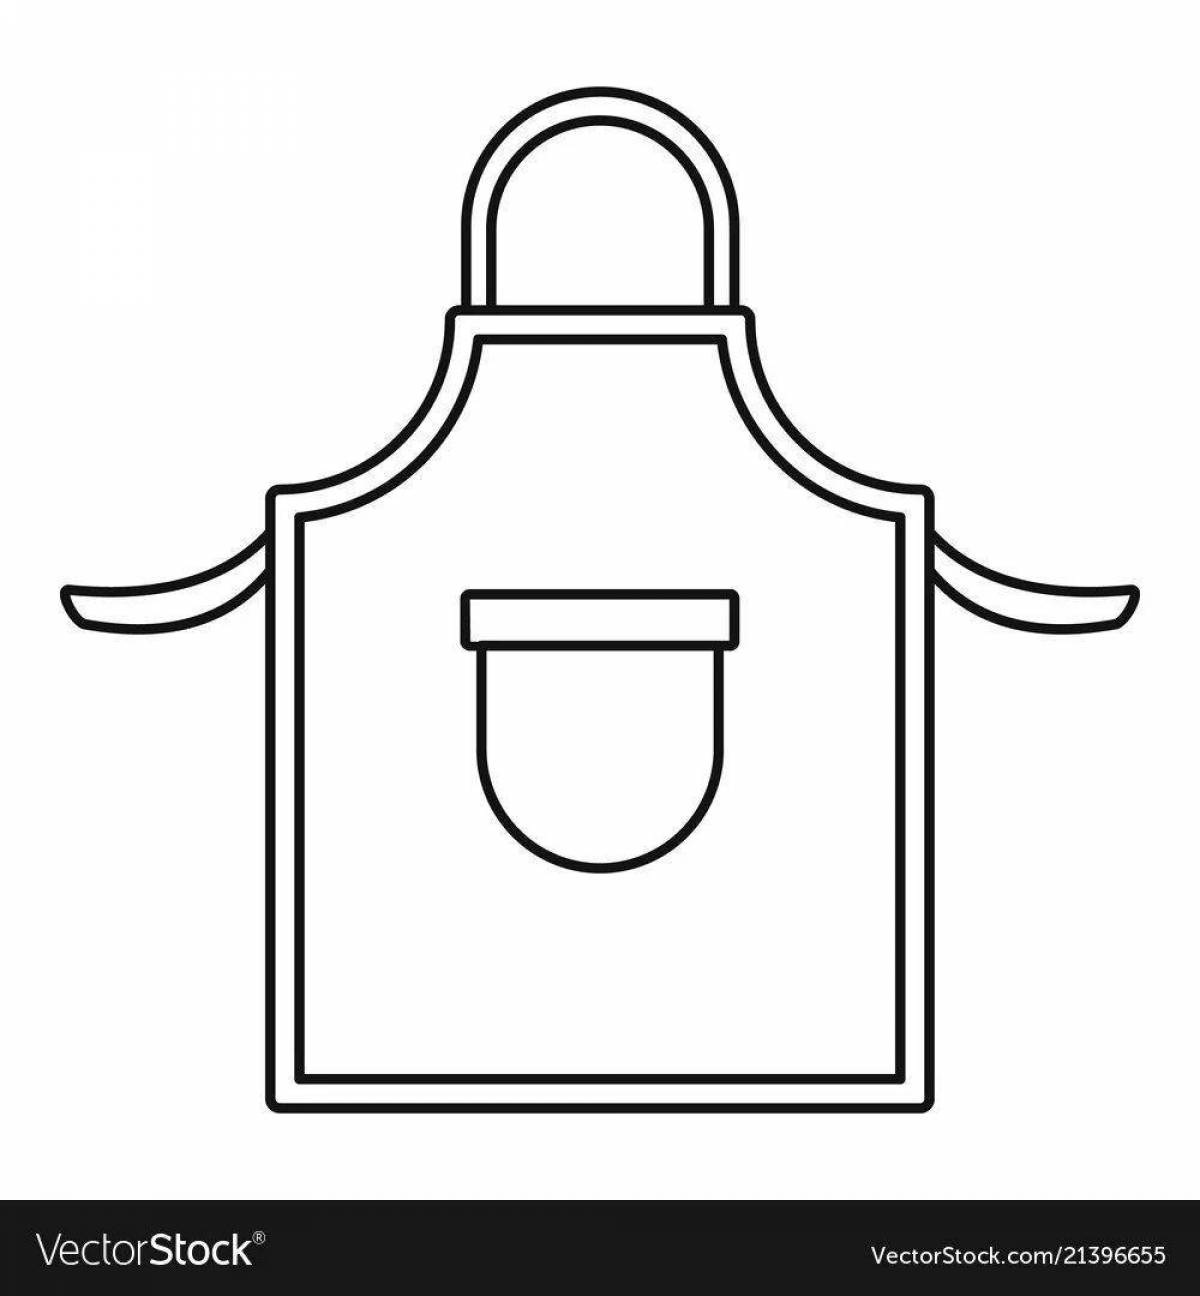 Playful apron coloring page for kids